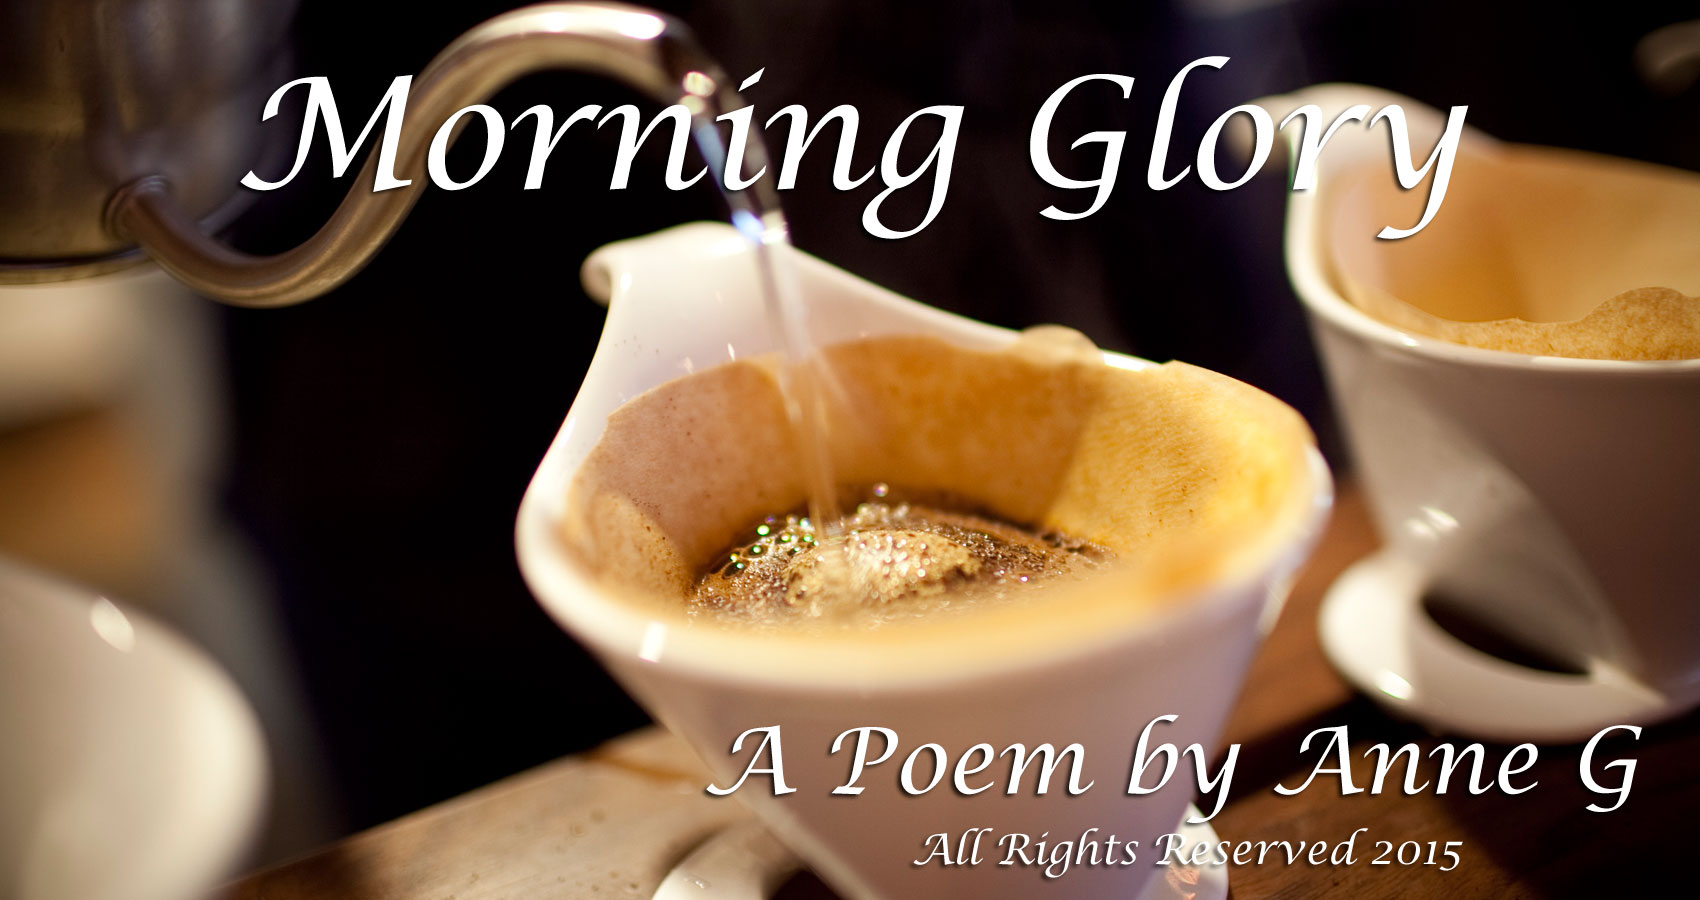 Morning Glory a poem at spillwords.com by Anne G